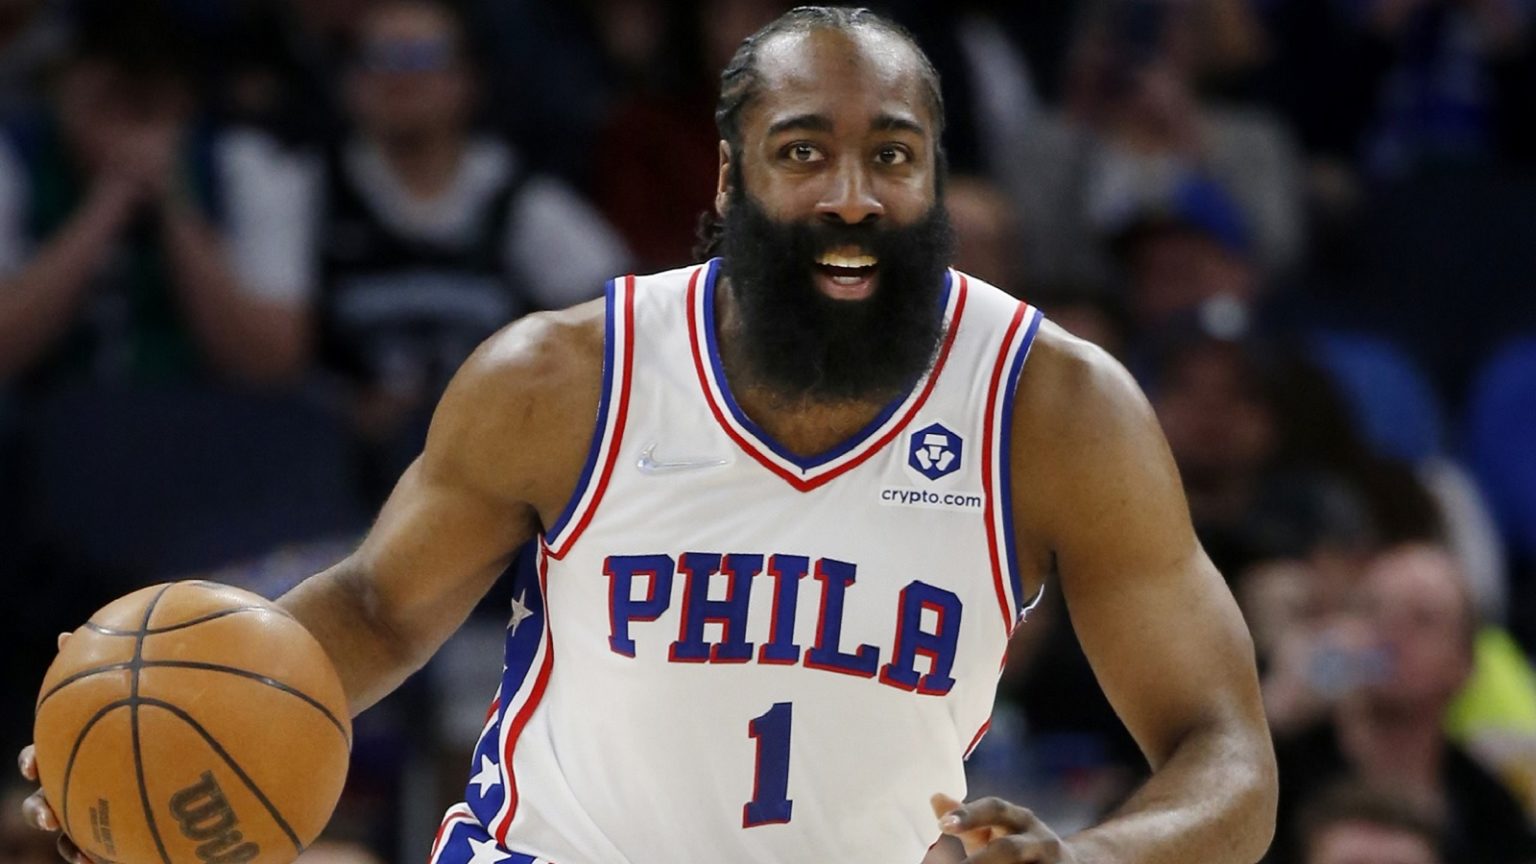 James Harden made ESPN reporters eat their words